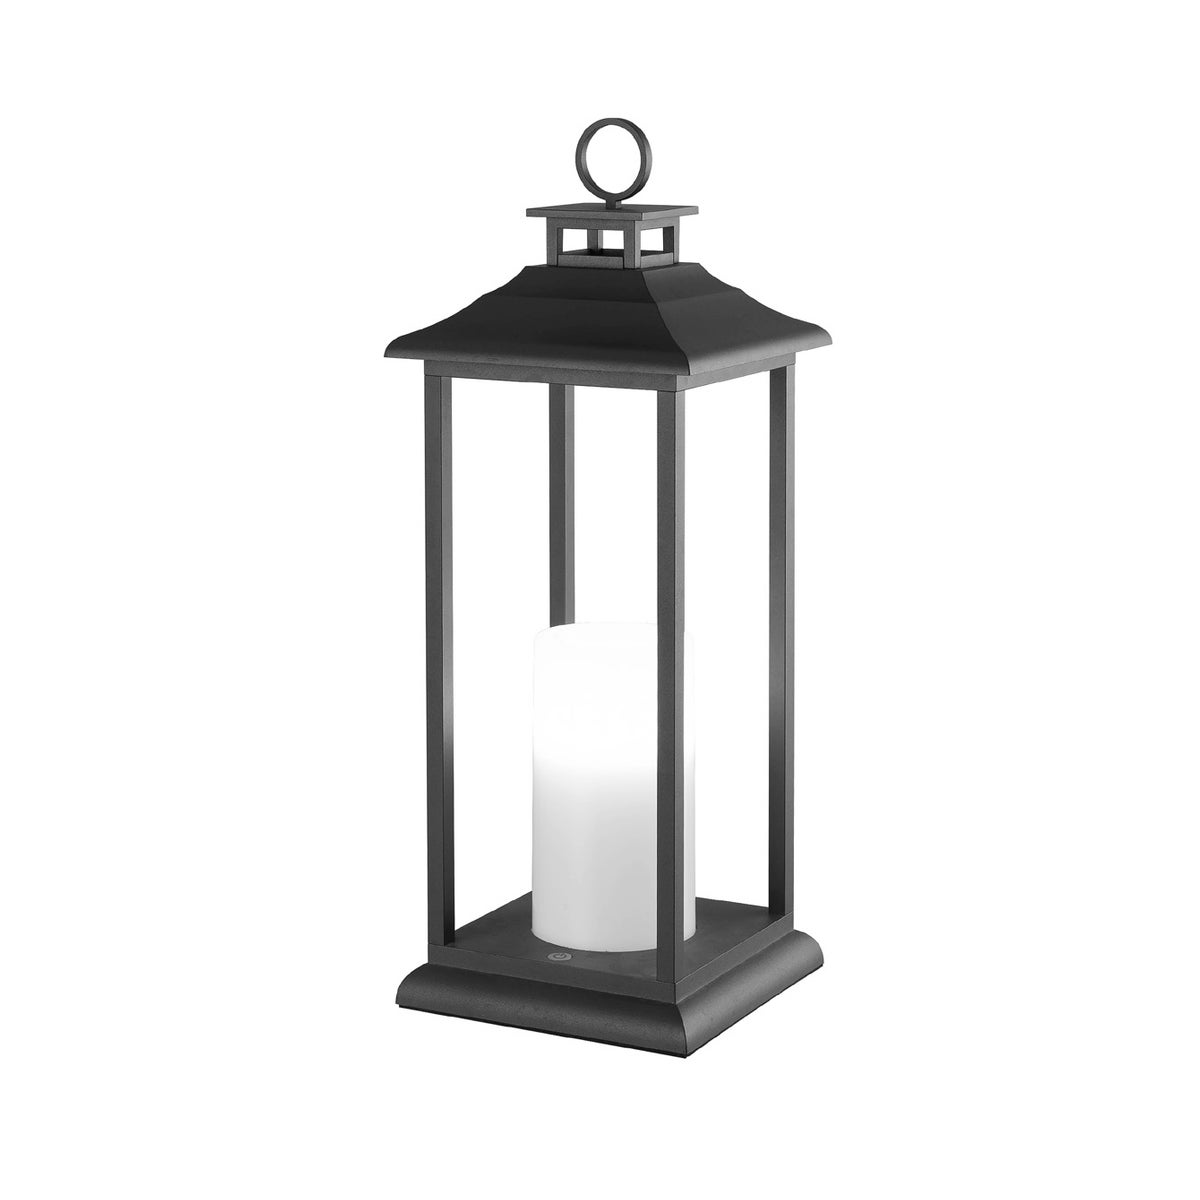 Epoque Short in Charcoal Battery Powered Lantern - battery powered